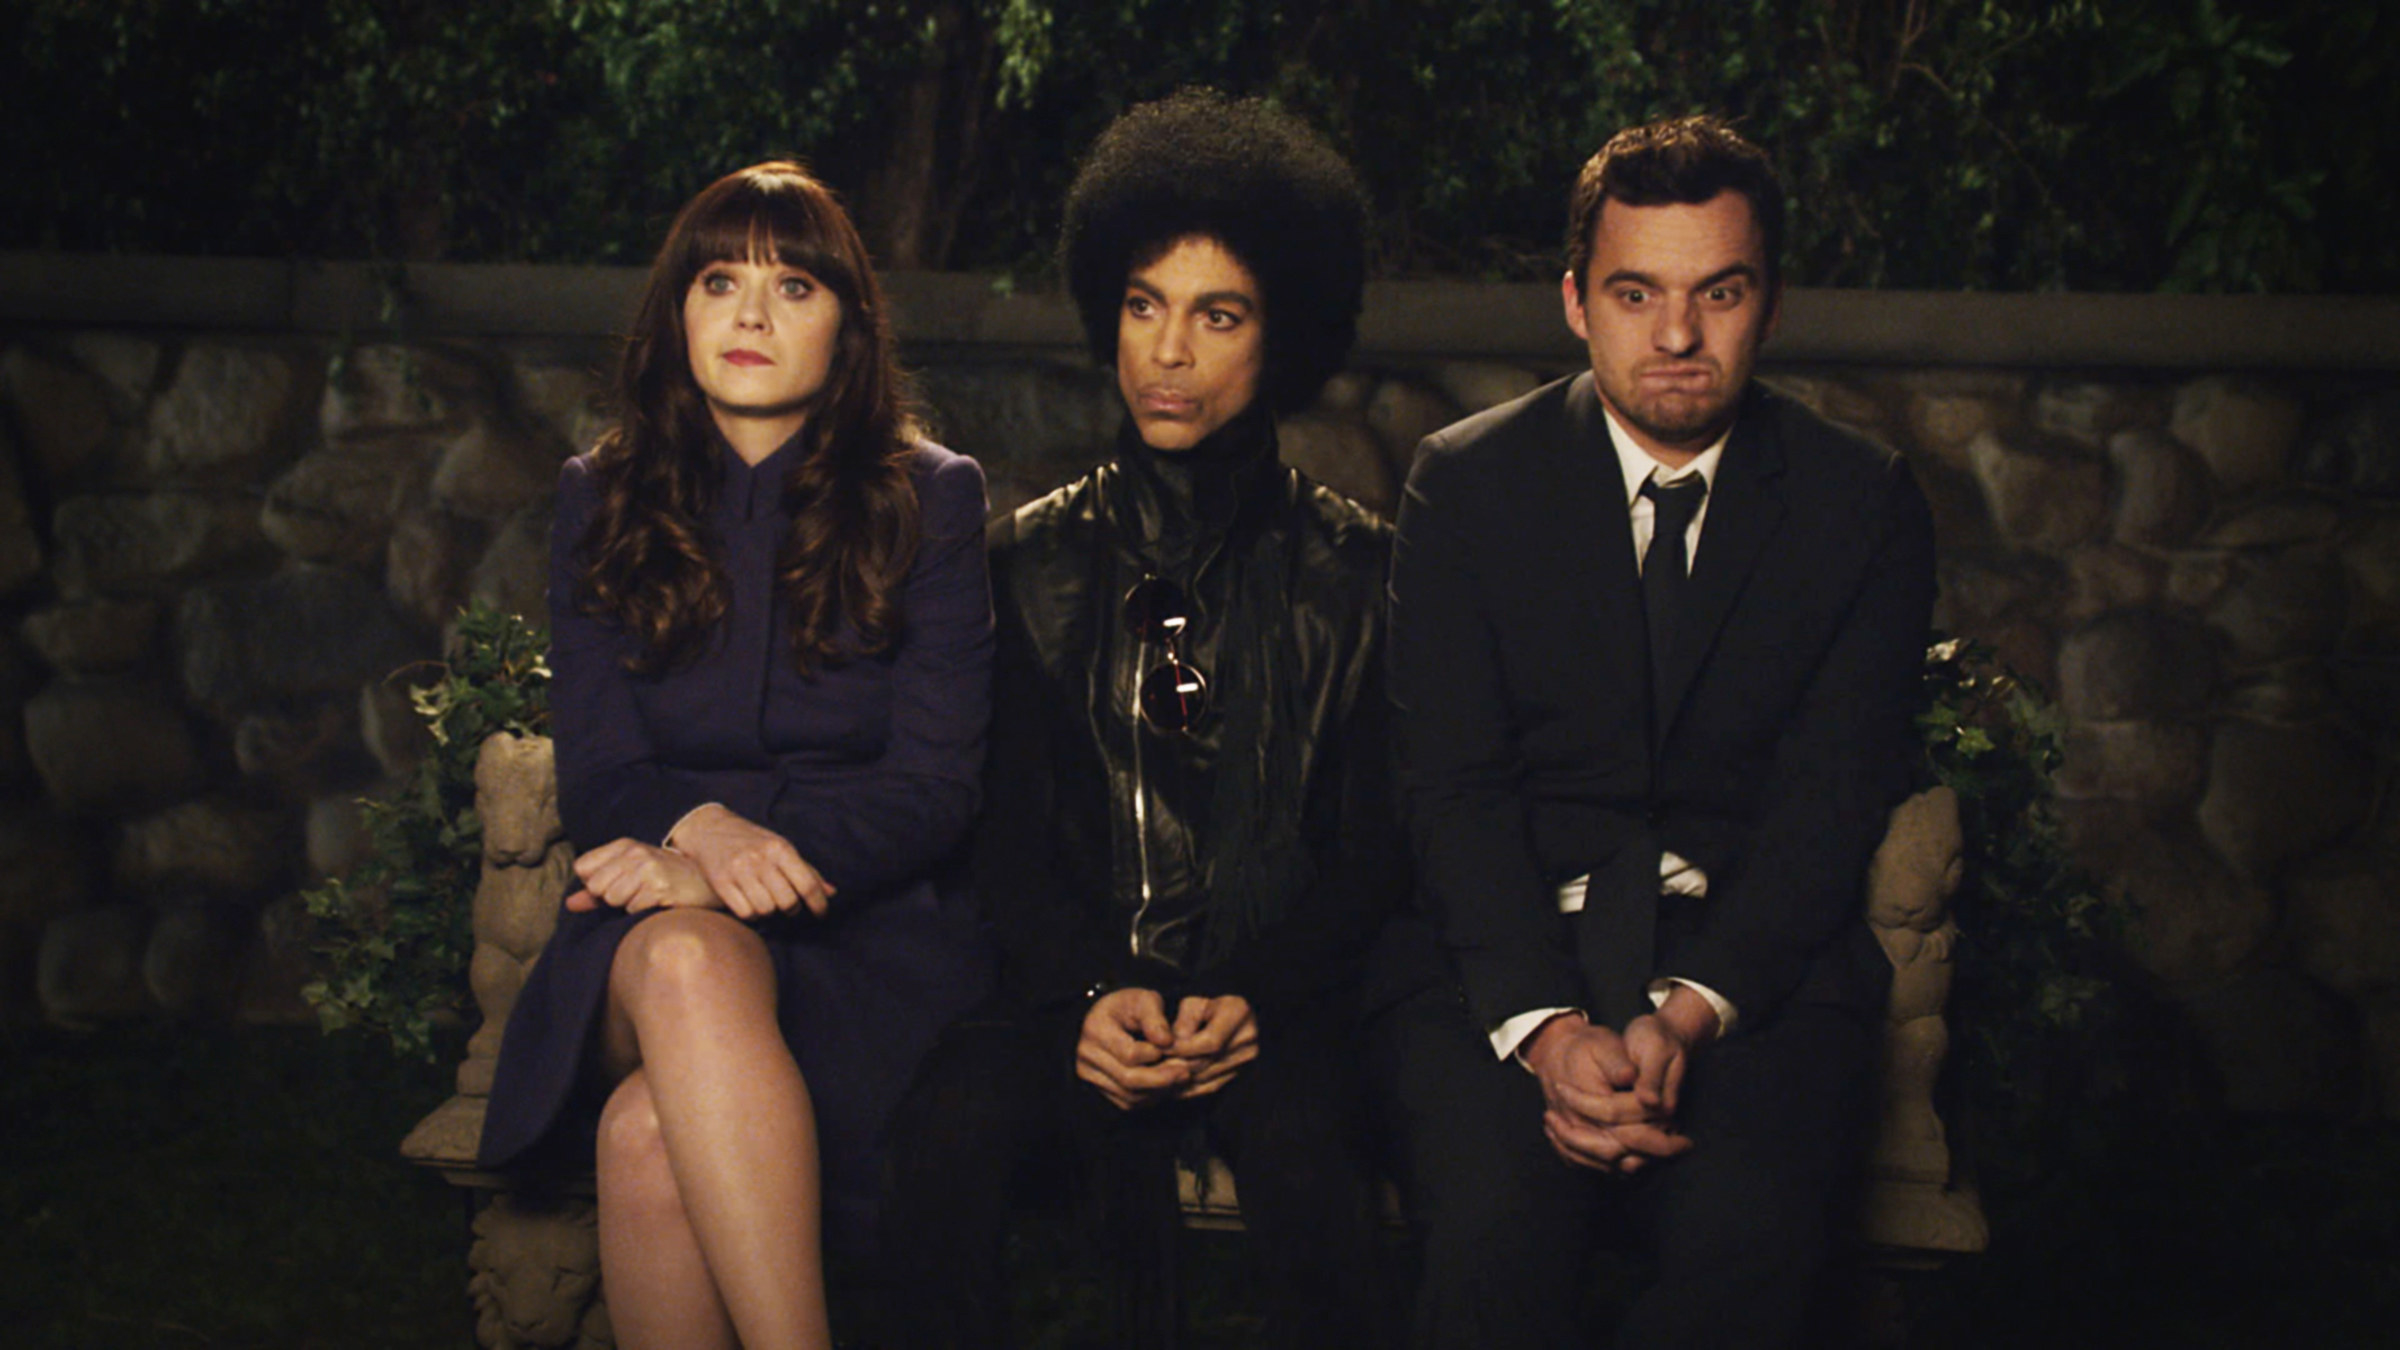 Prince sitting in between Deschanel and Jake Johnson